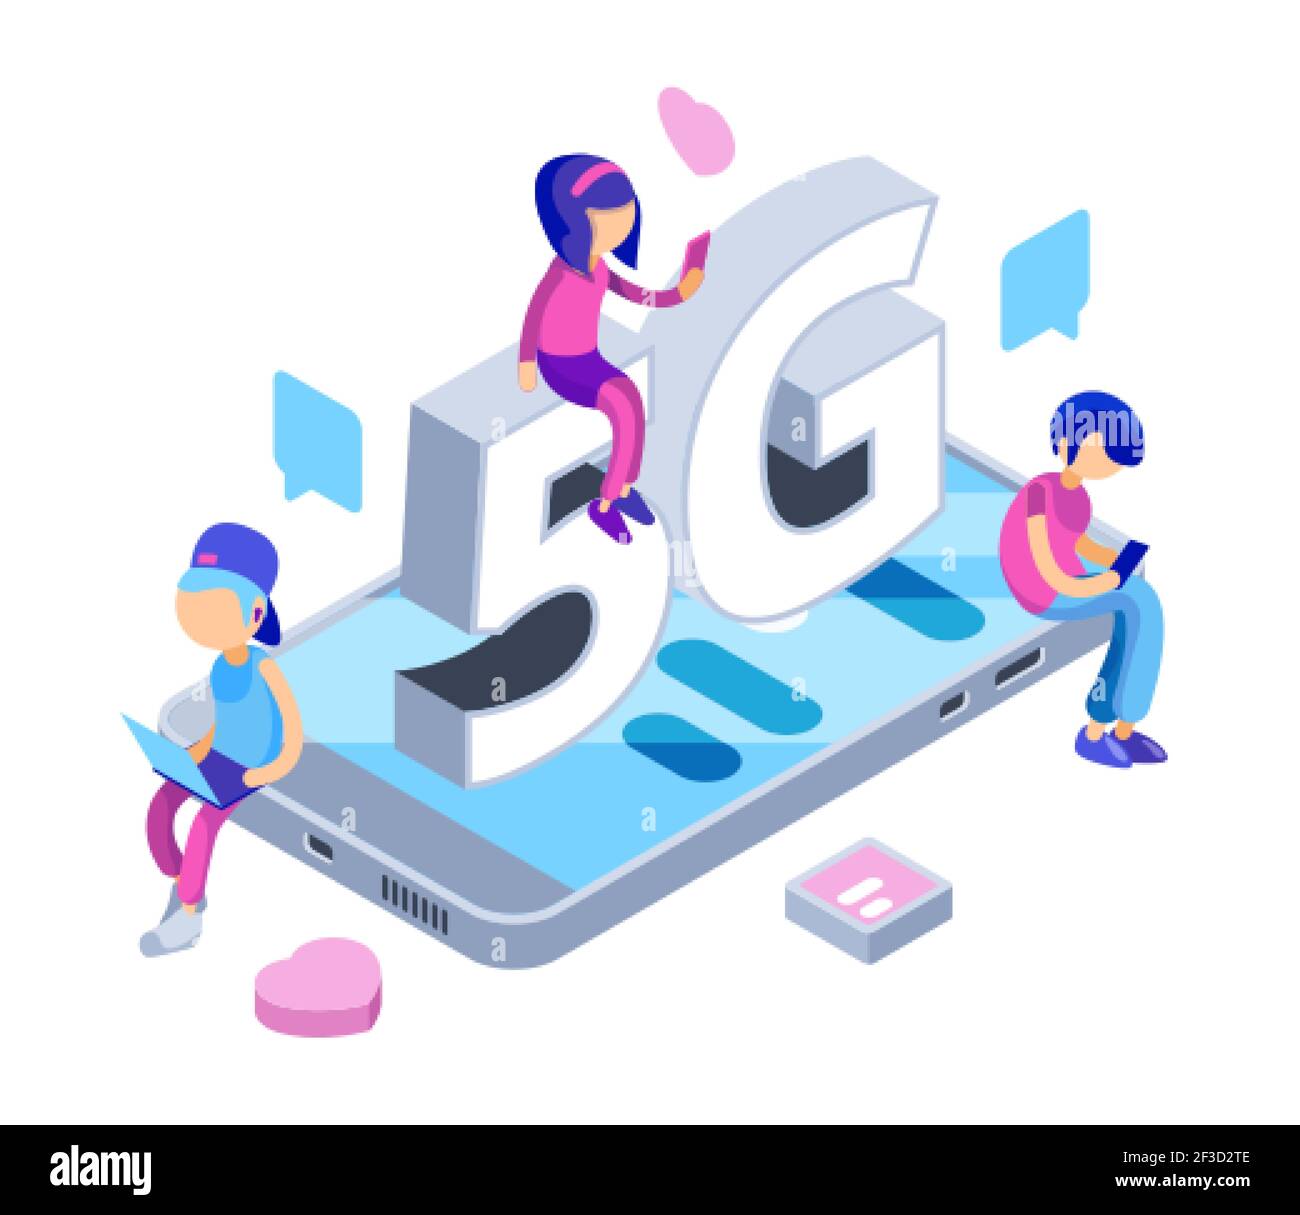 Internet 5g concept. Free wifi network. Vector isometric teenagers with gadgets, smartphones, laptop Stock Vector